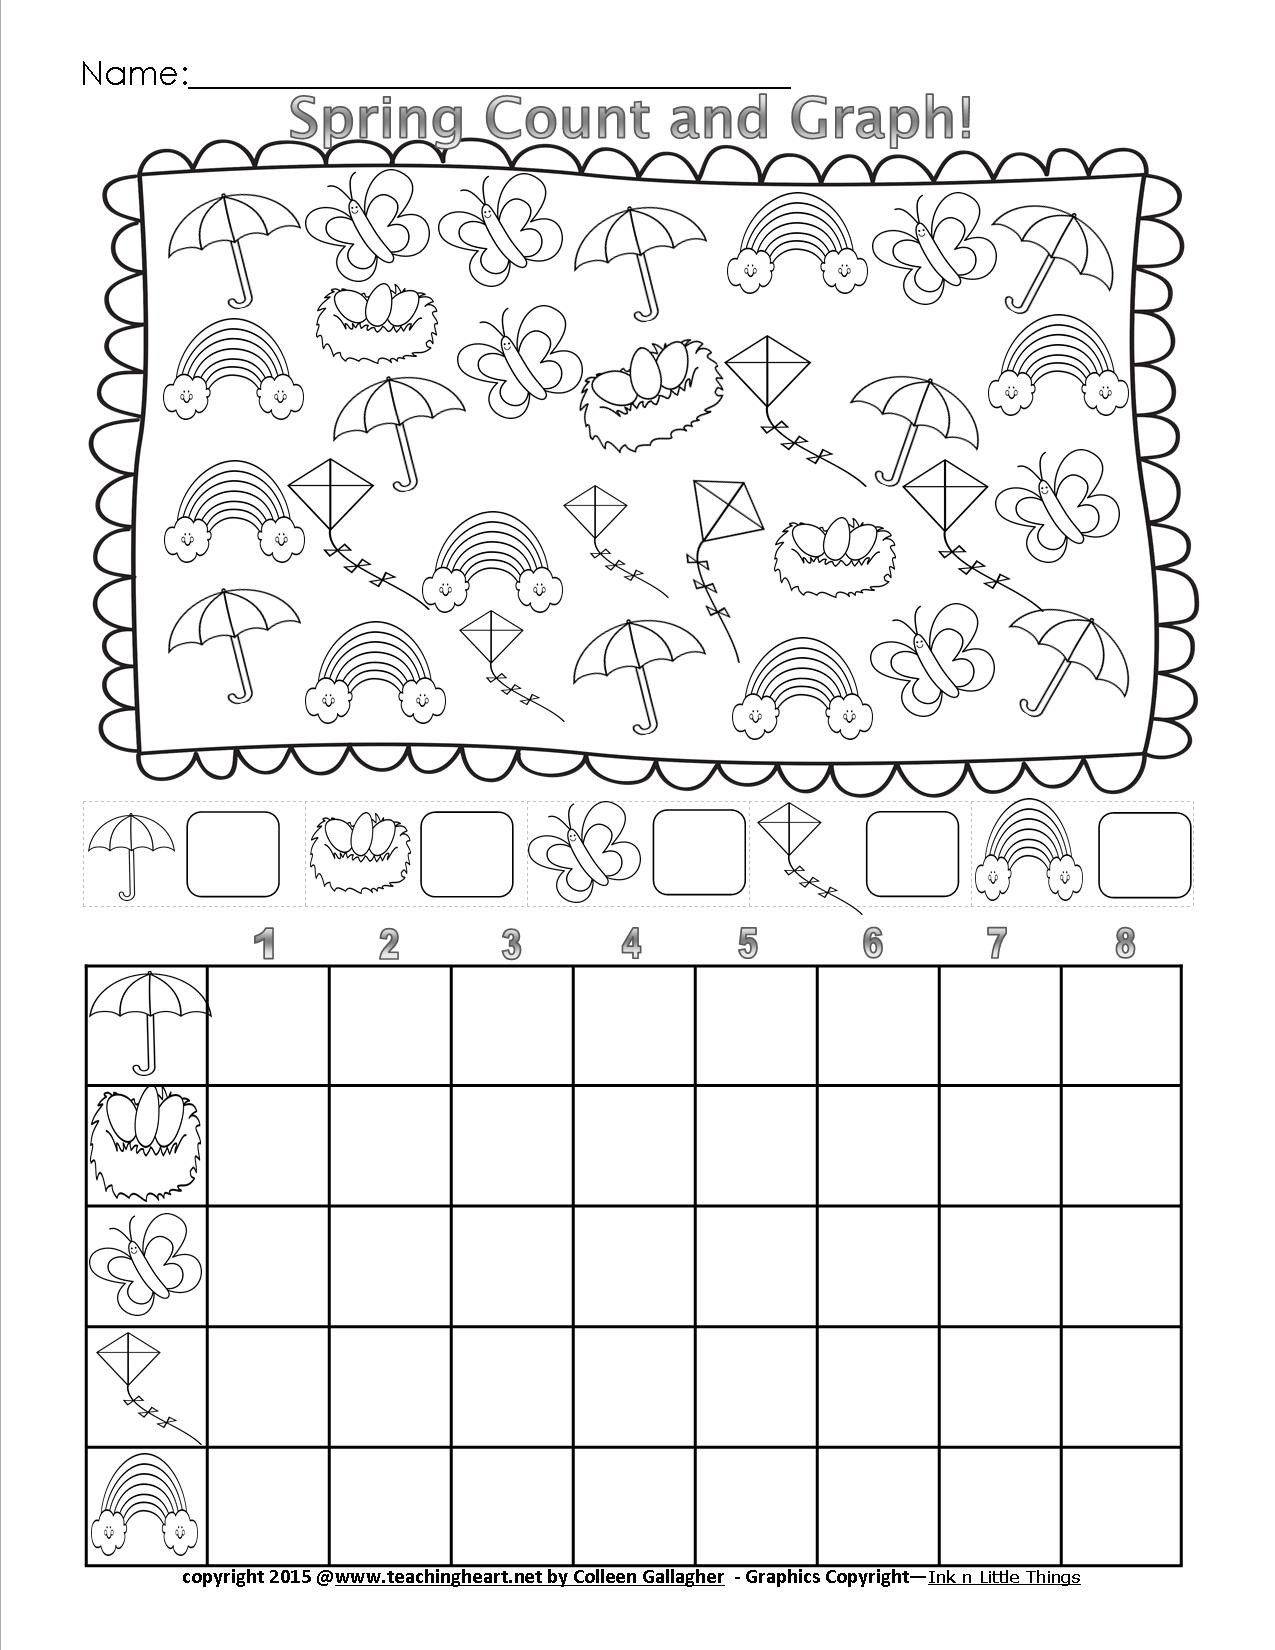 Spring Count And Graph - Free - Teaching Heart Blog Teaching Heart Blog | Free Printable Graph Art Worksheets